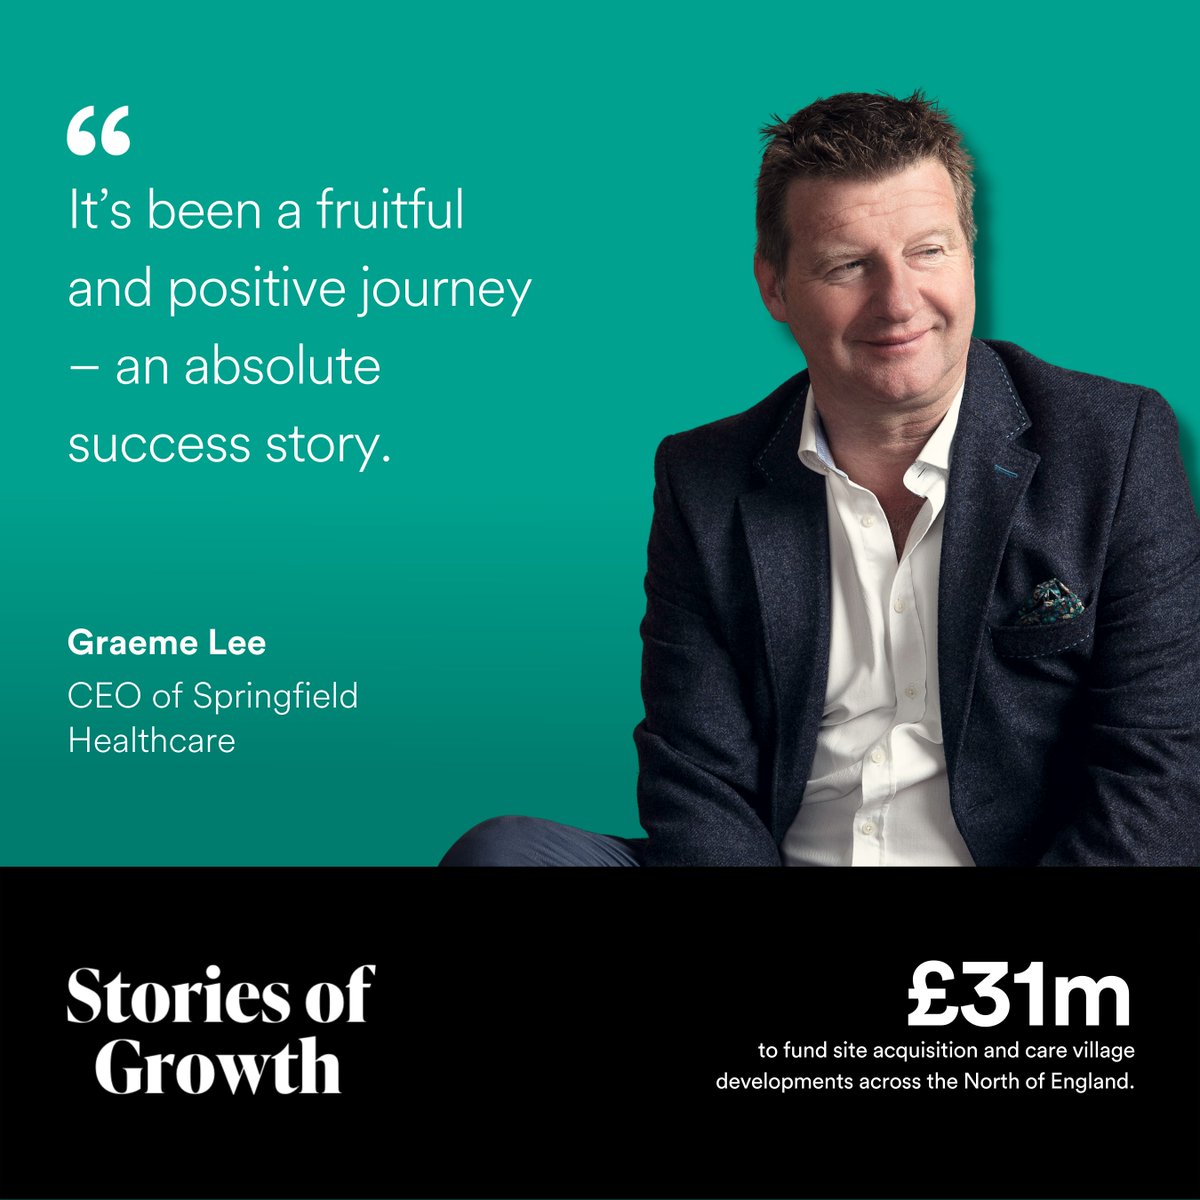 It’s ten years since BGF first invested in the care business Springfield Healthcare. We’ve now invested over £30 million to help finance six purpose-built or converted care homes and villages. Hear from CEO, Graeme Lee about their journey. ow.ly/bawE50JWJSL